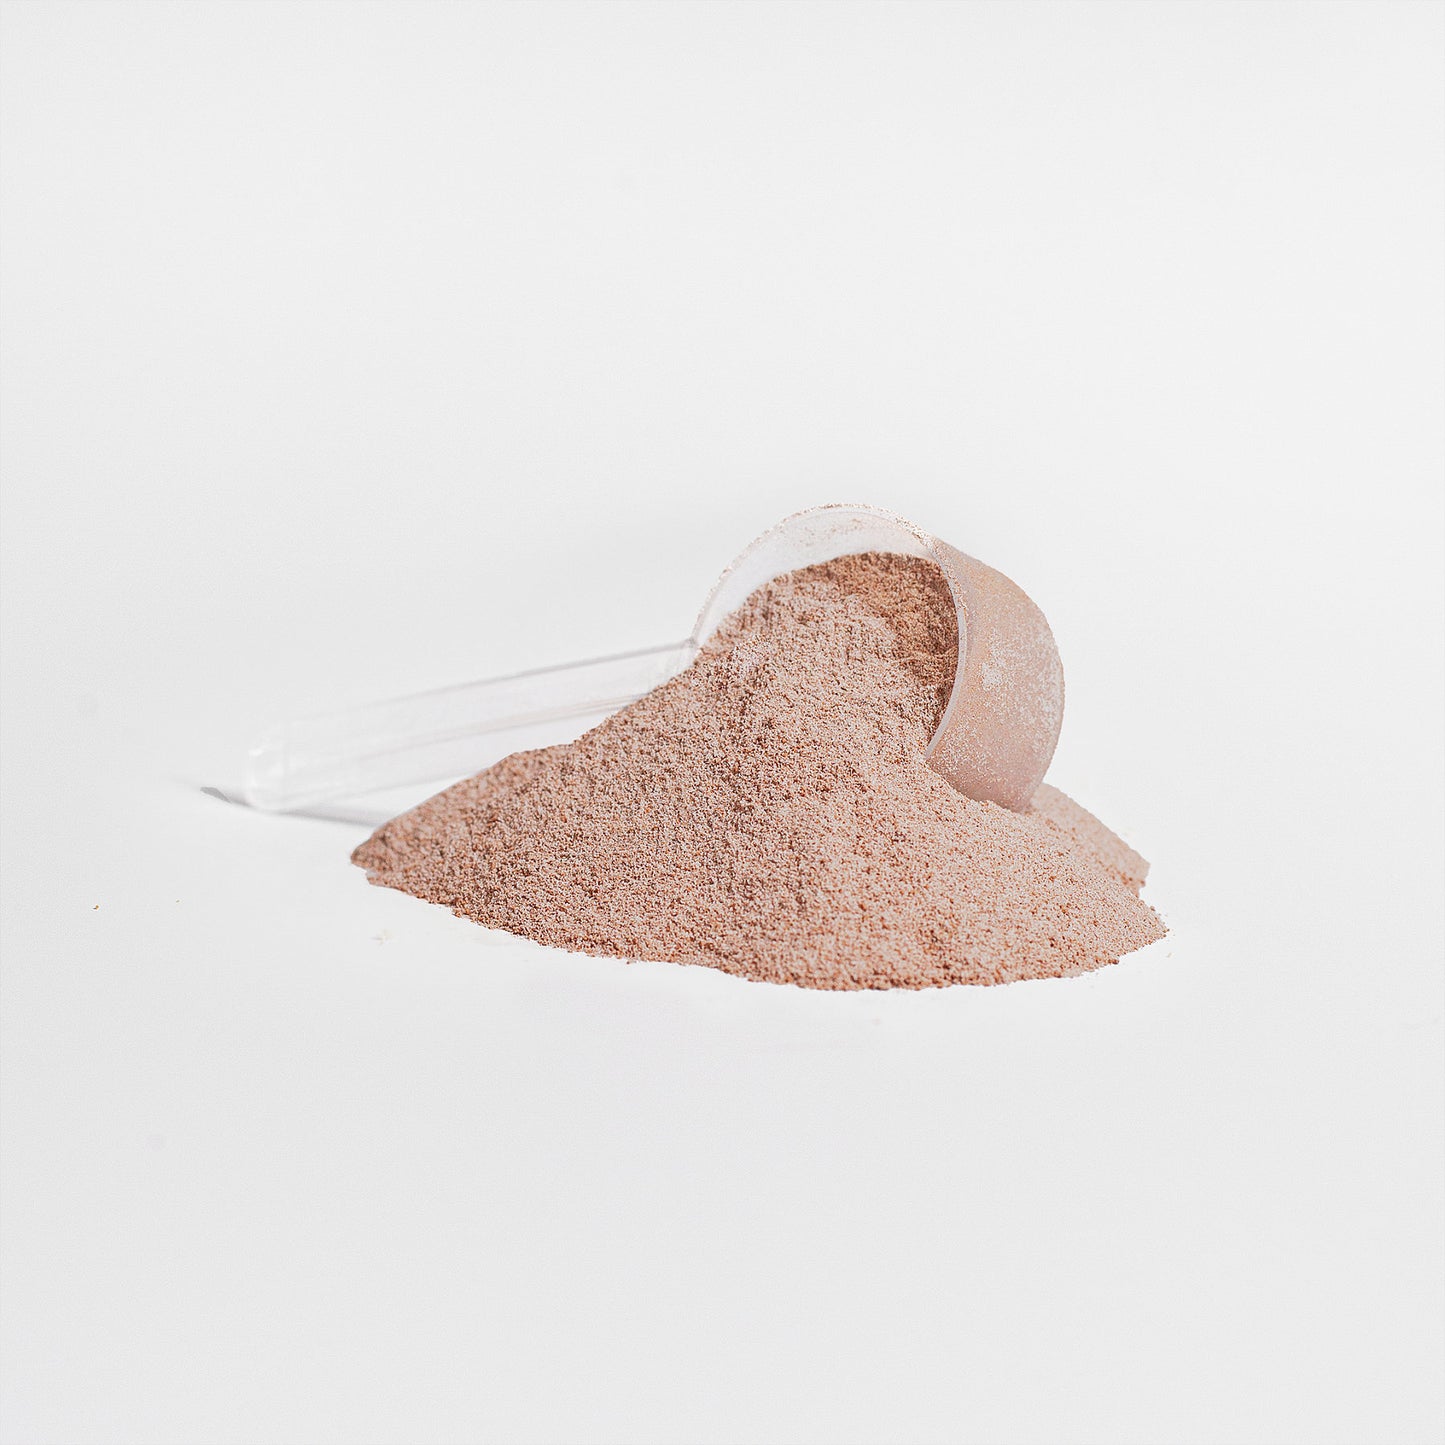 Complete Meal Replacement Powder (Chocolate)